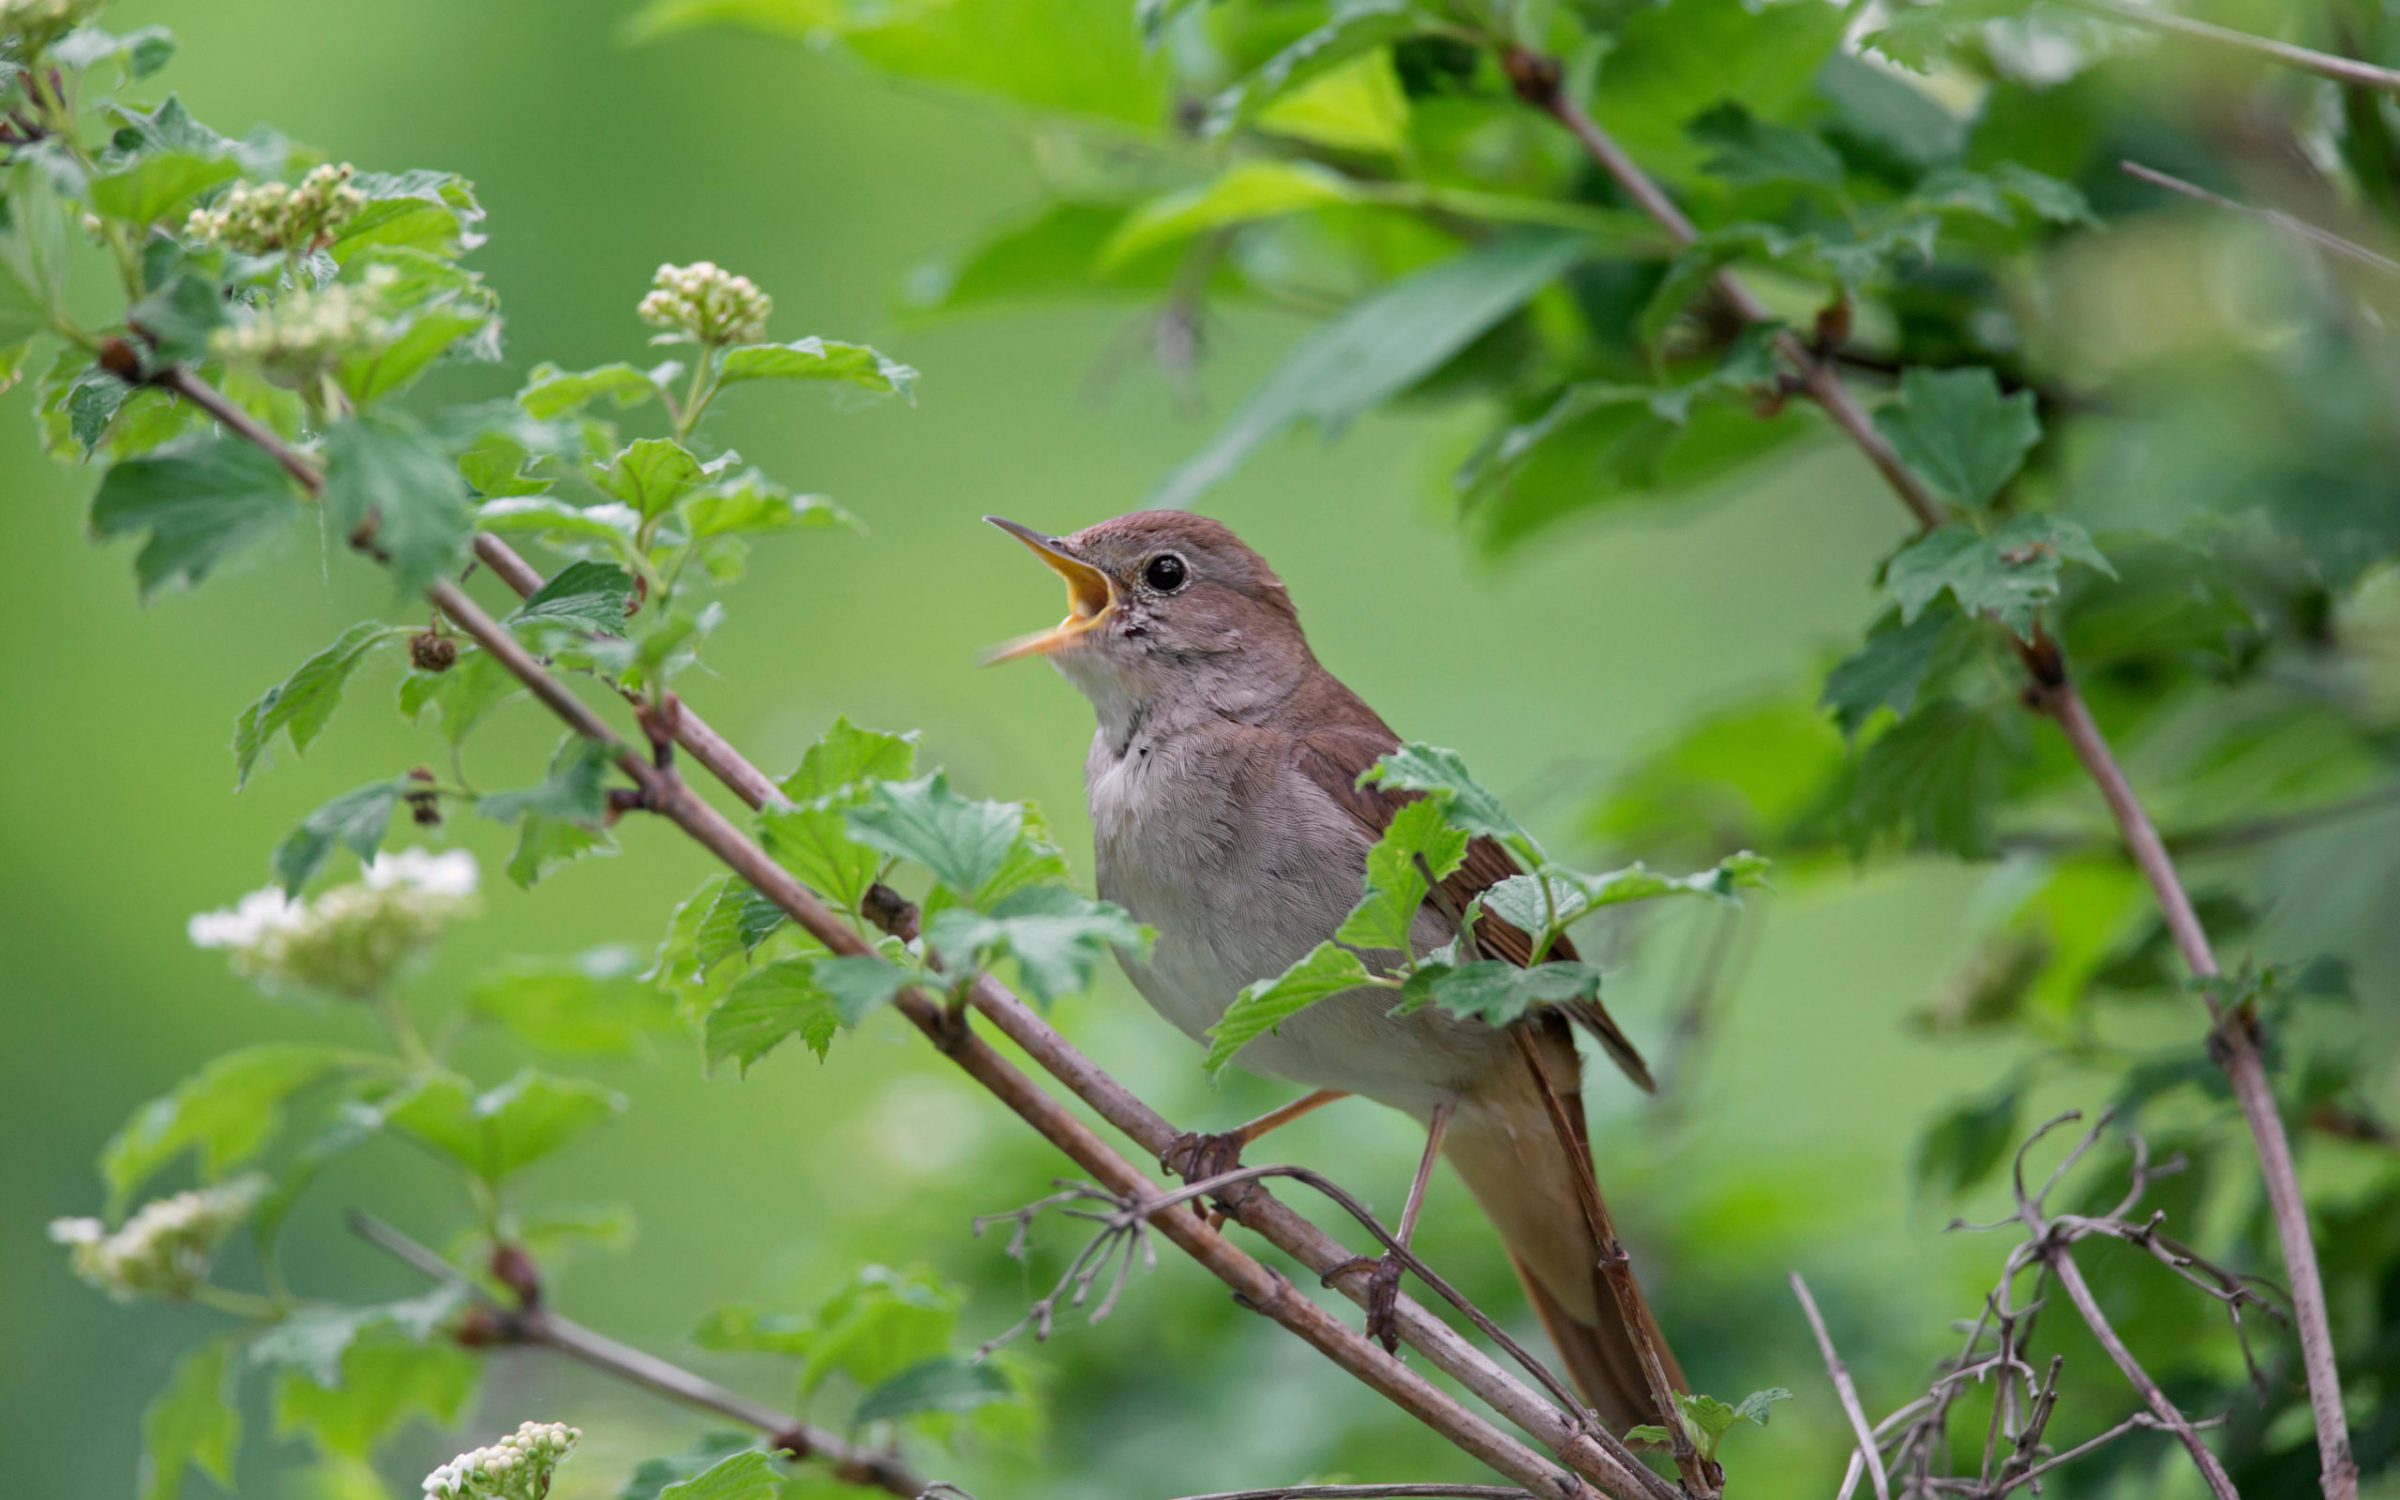 Singing common nightingale / rufous nightingale (Luscinia megarhynchos) male perched in tree in spring - soundscape